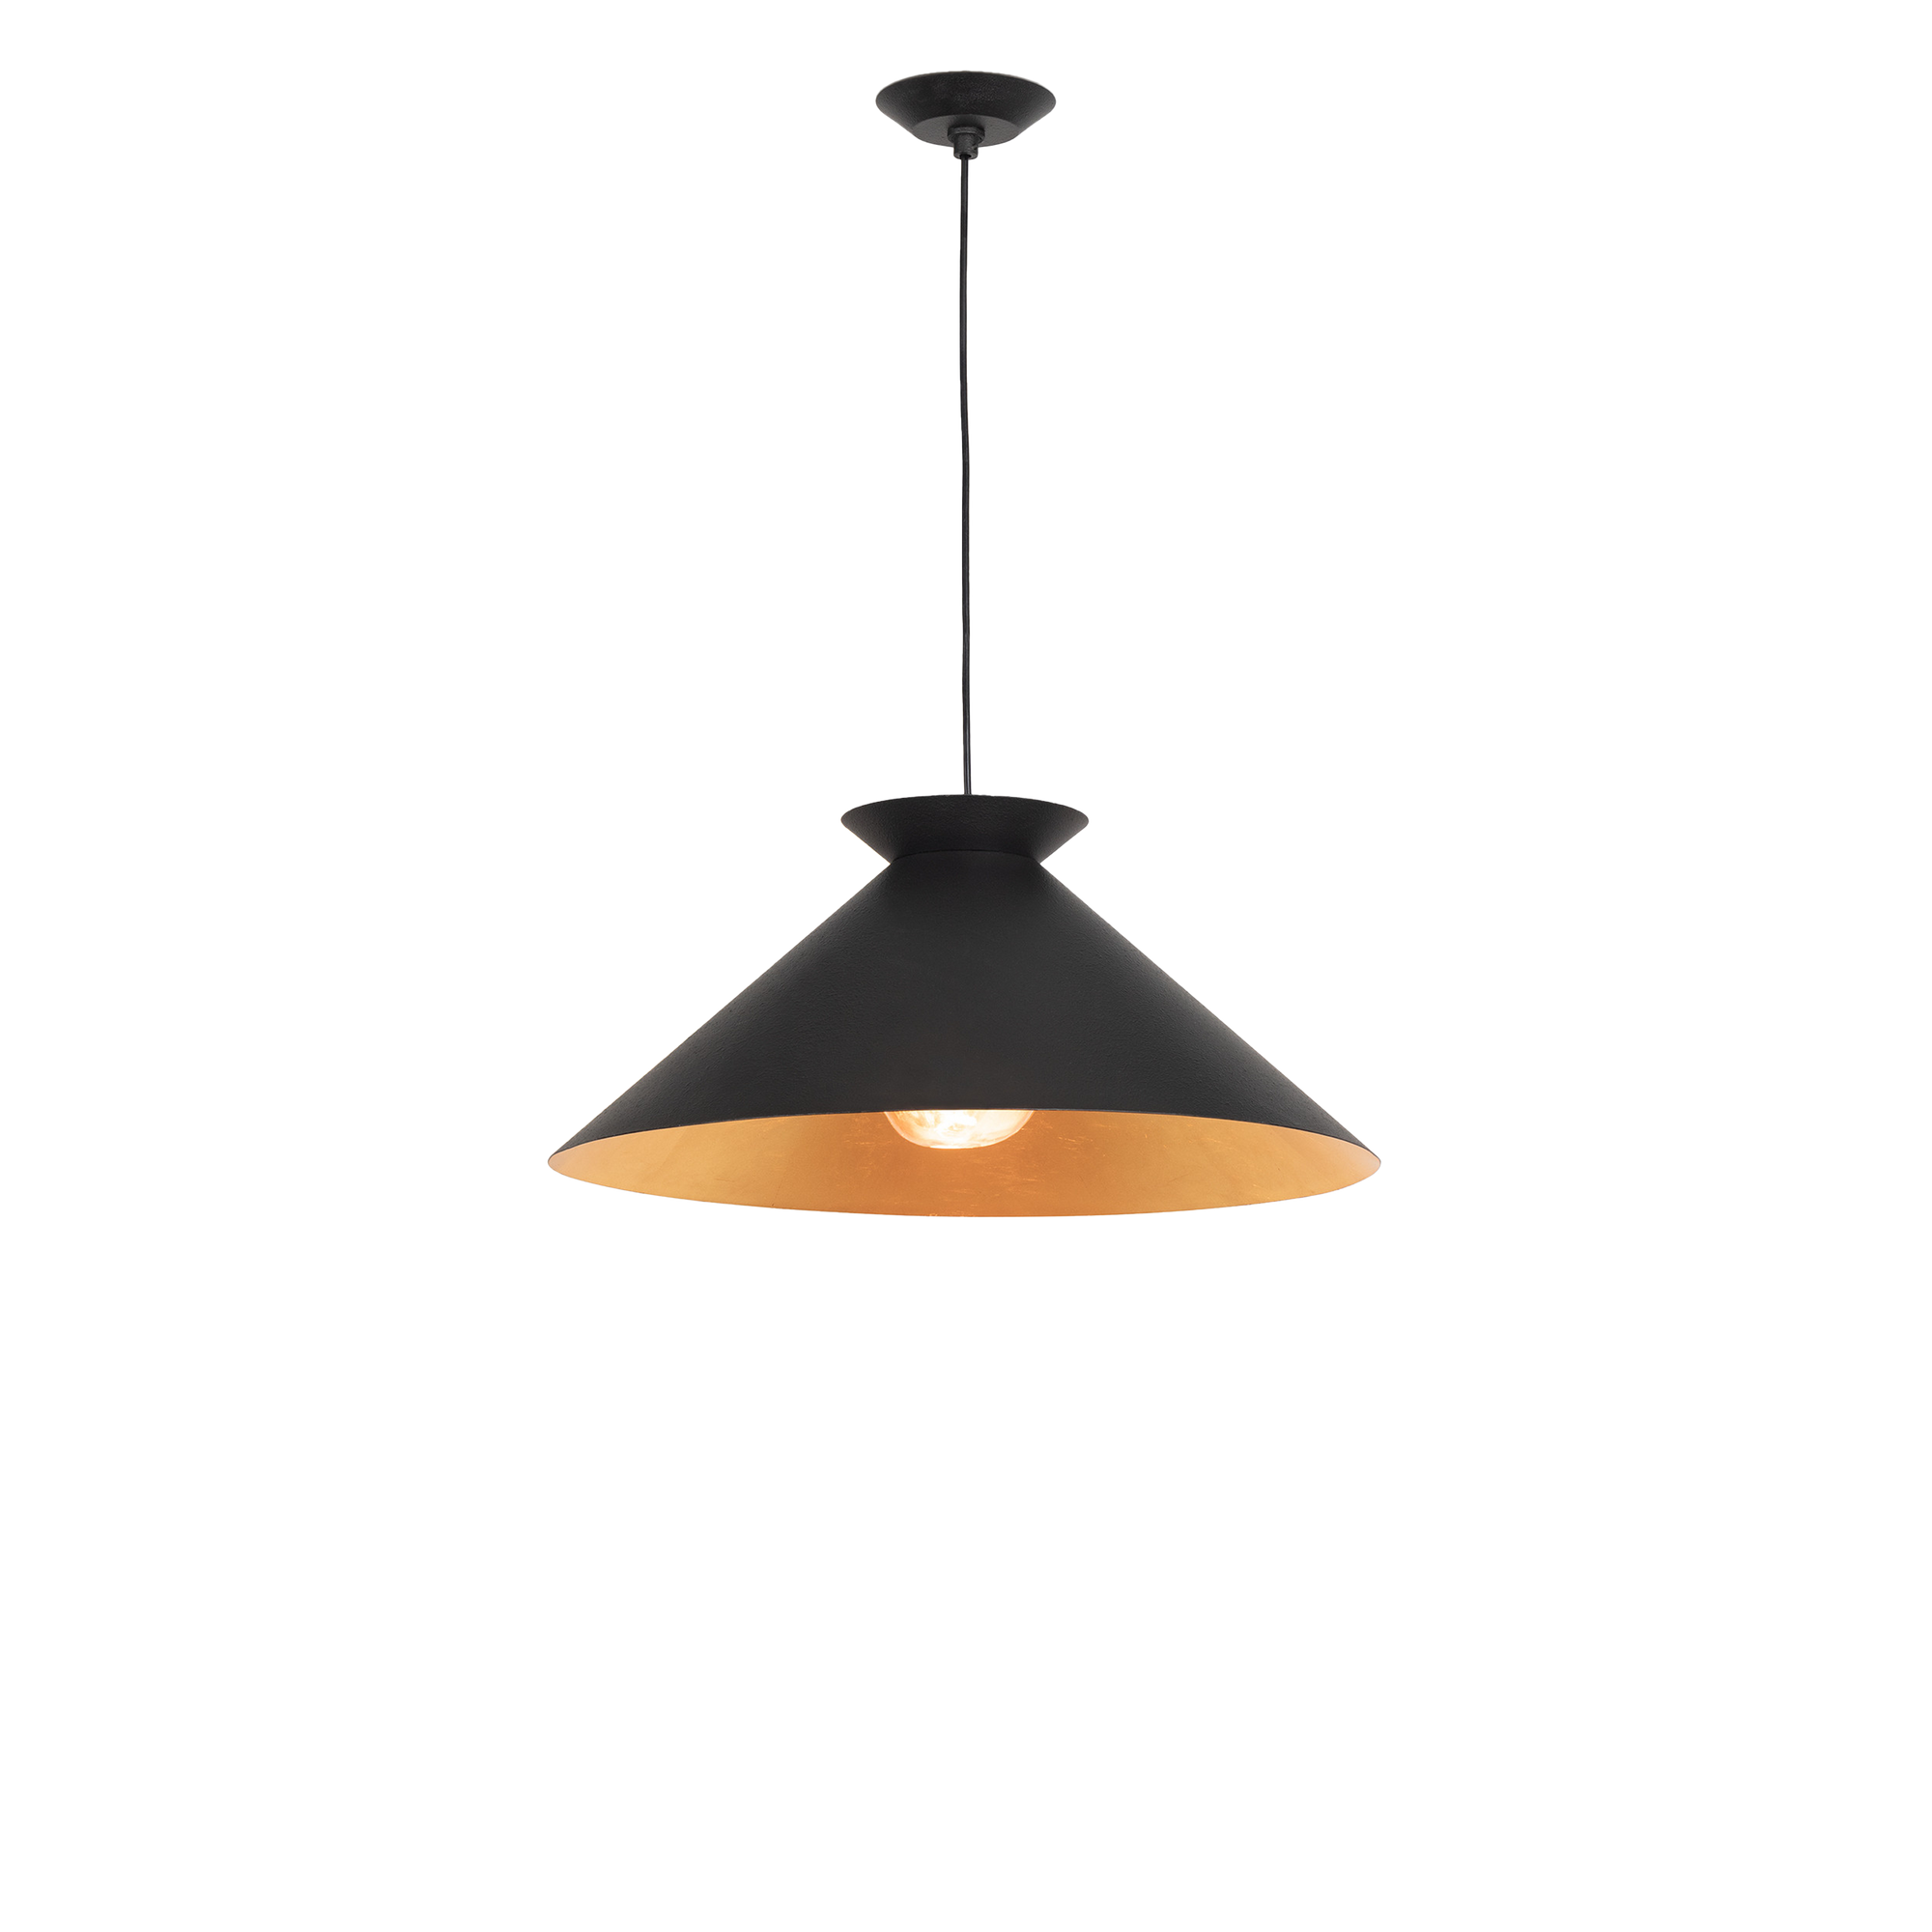 Experience the beauty of modern design with our Viggo Pendant.